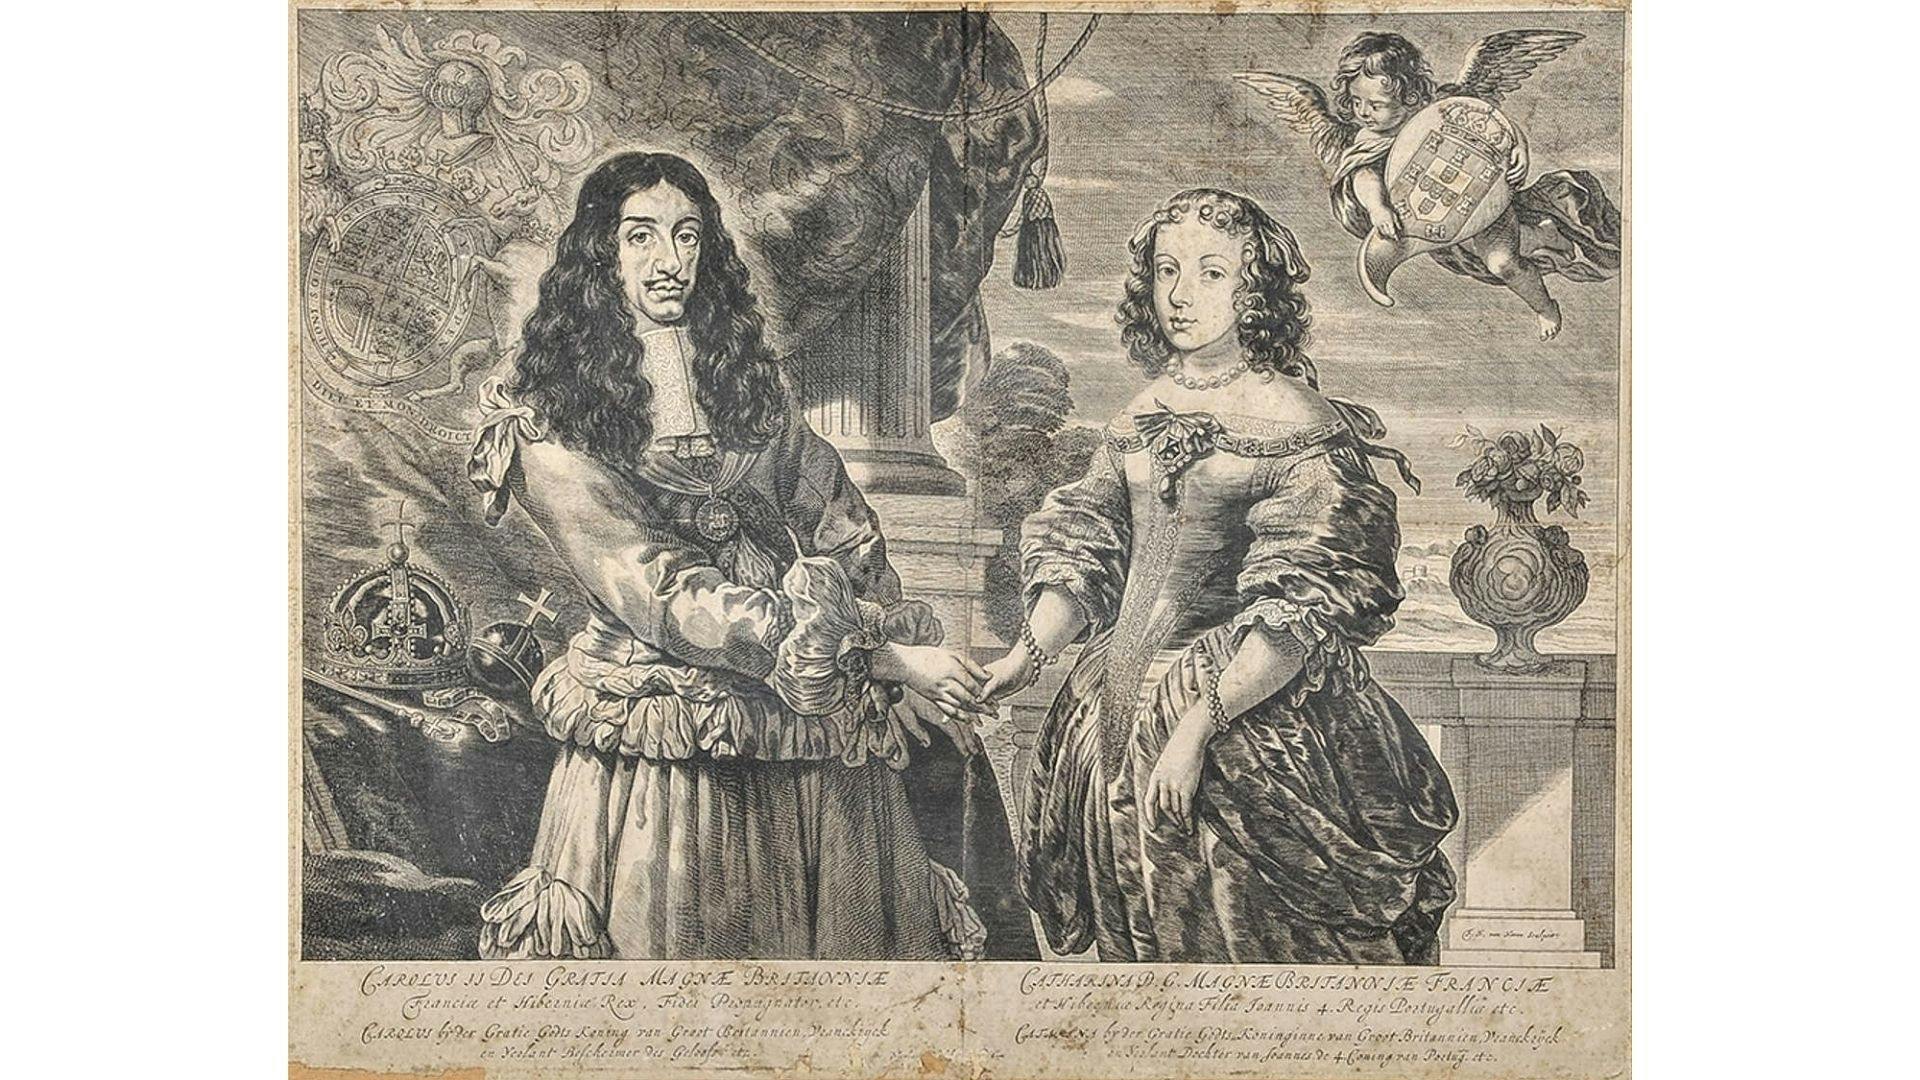 The Marriage of Catherine of Braganza to King Charles II, 21st May 1662